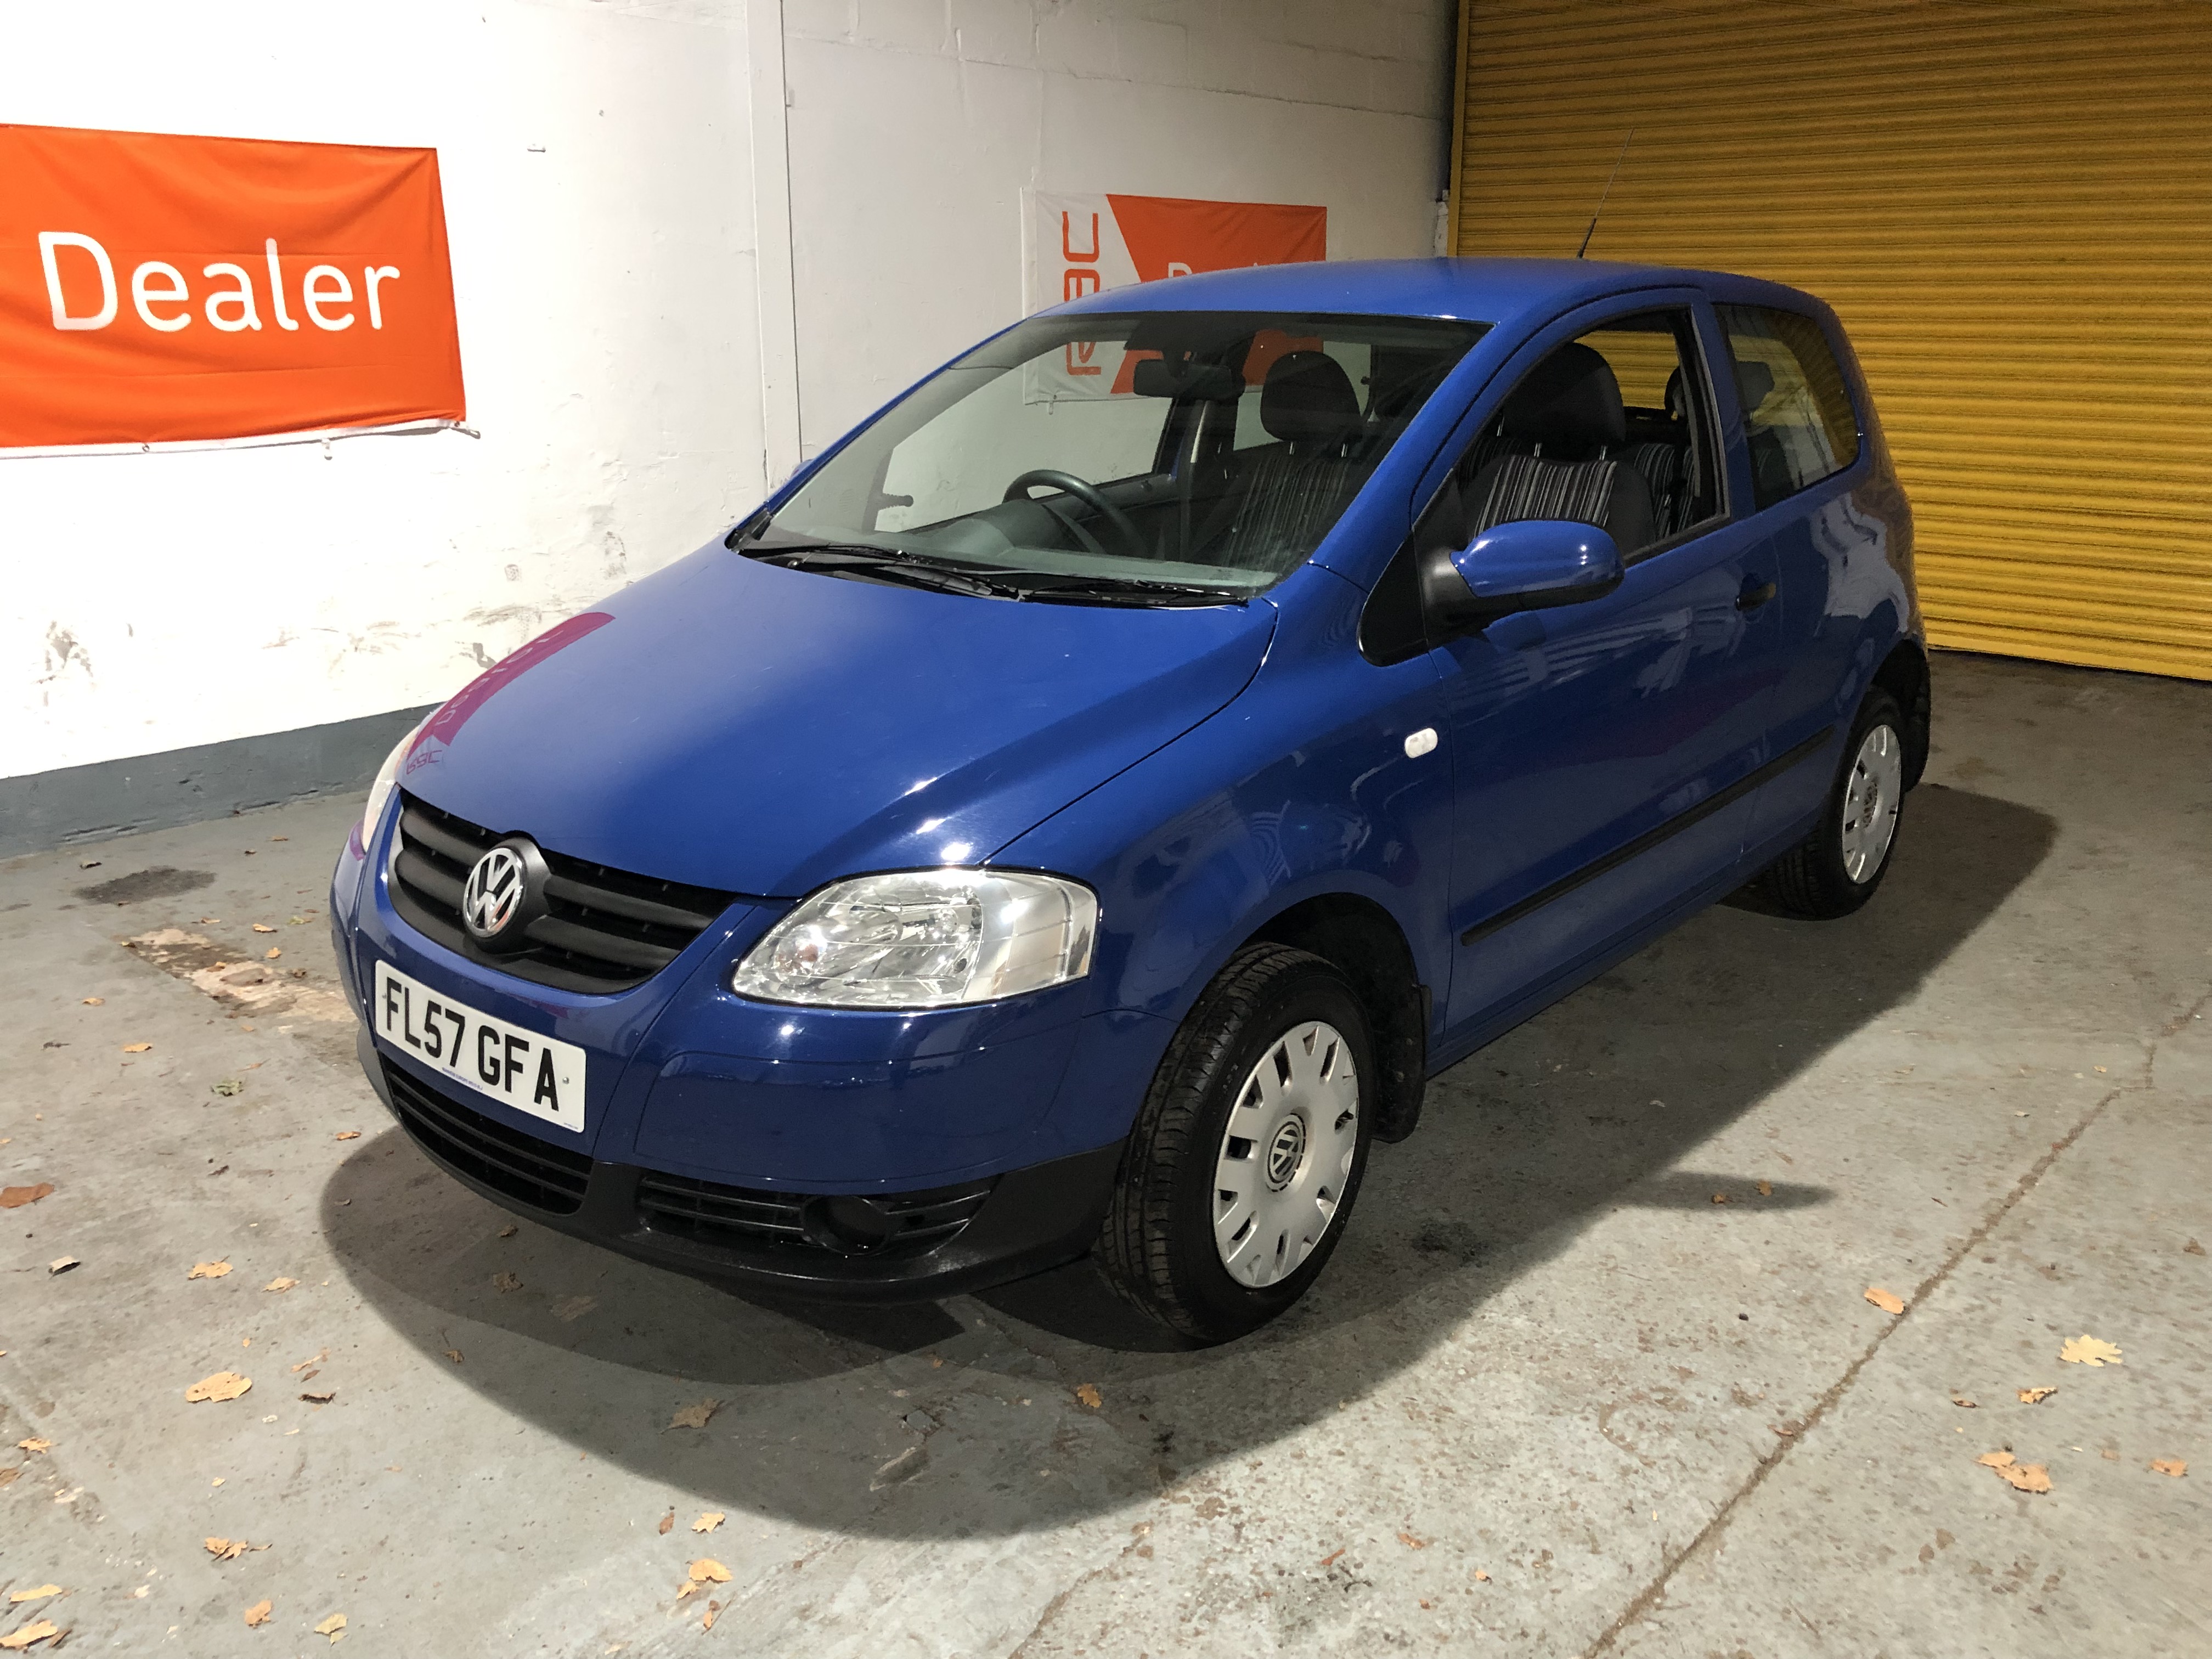 2007 VW Fox 1.2 Petrol - One Owner with full VW Service History - Finance -  The Mini Specialist - Mini Sales and Servicing